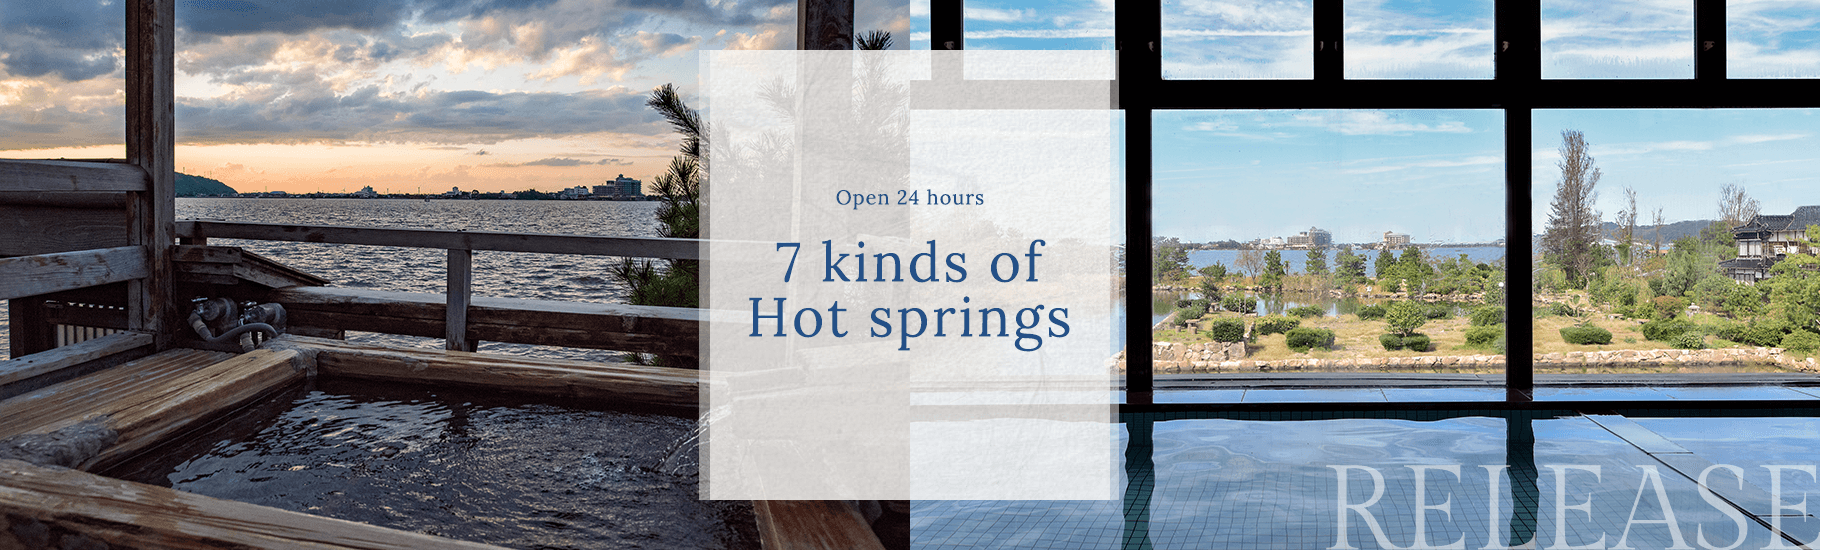 7 kinds of Hot springs